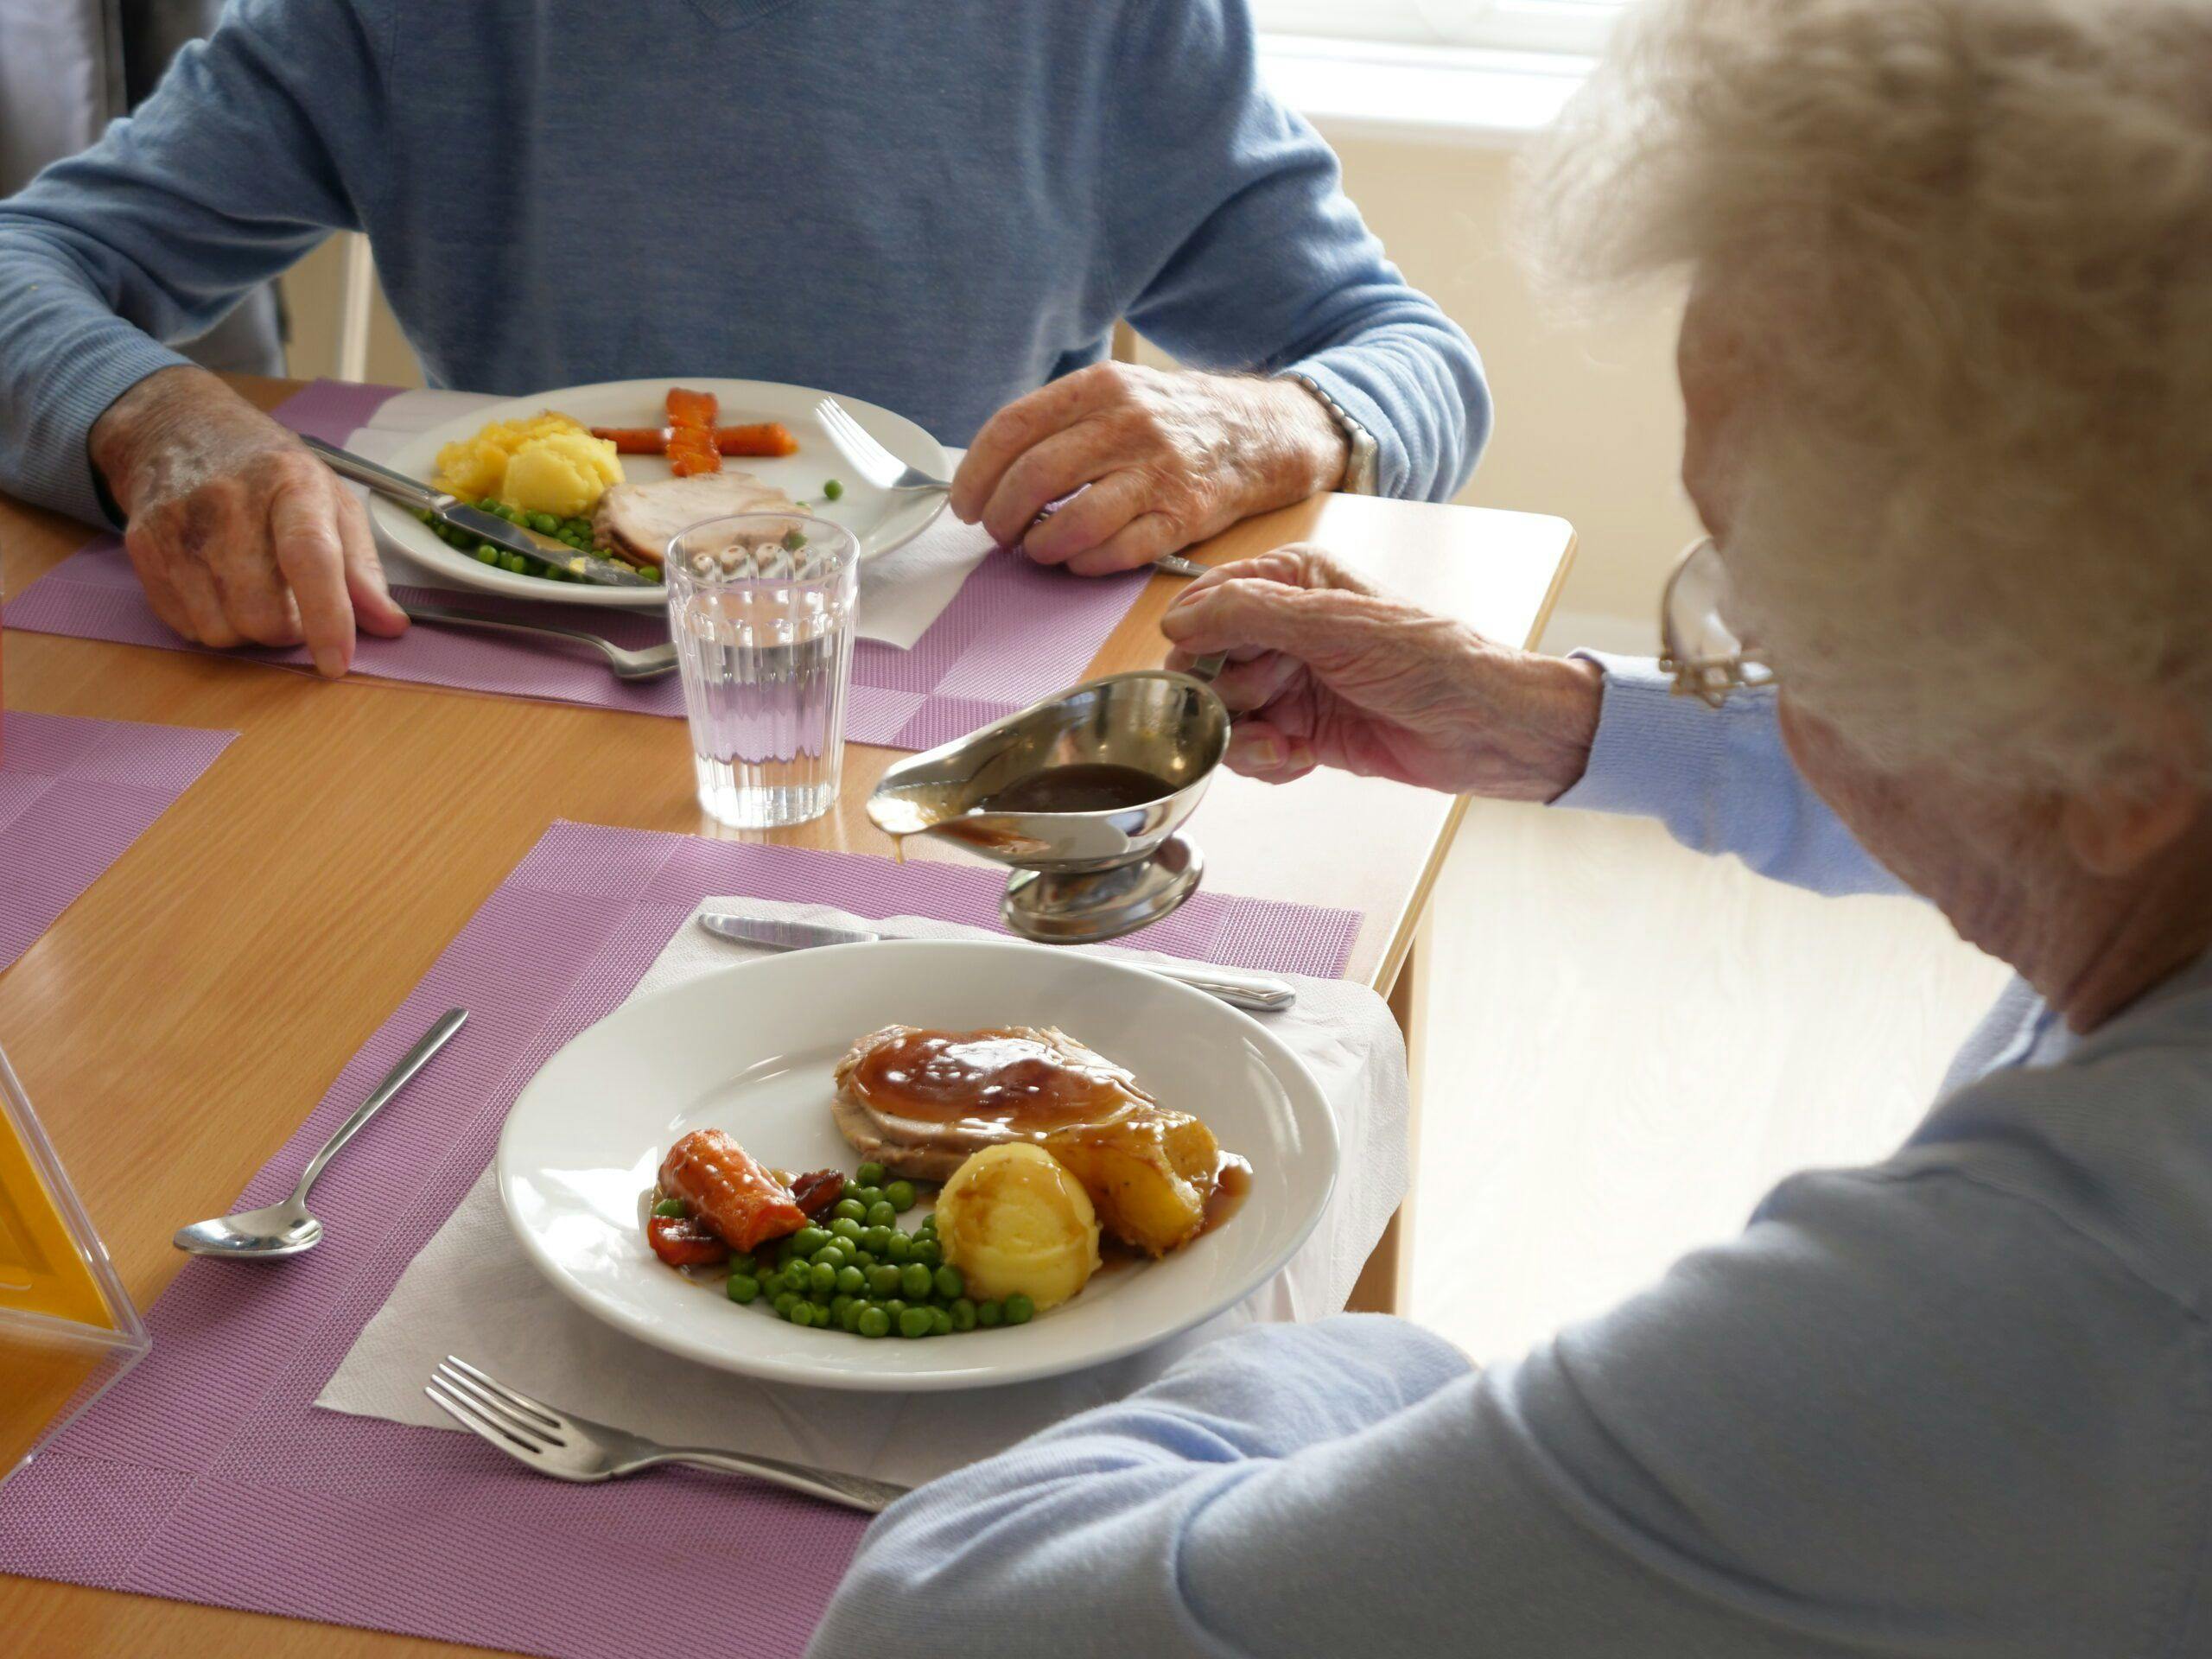 Meals of Roselands care home in Rye, East Sussex